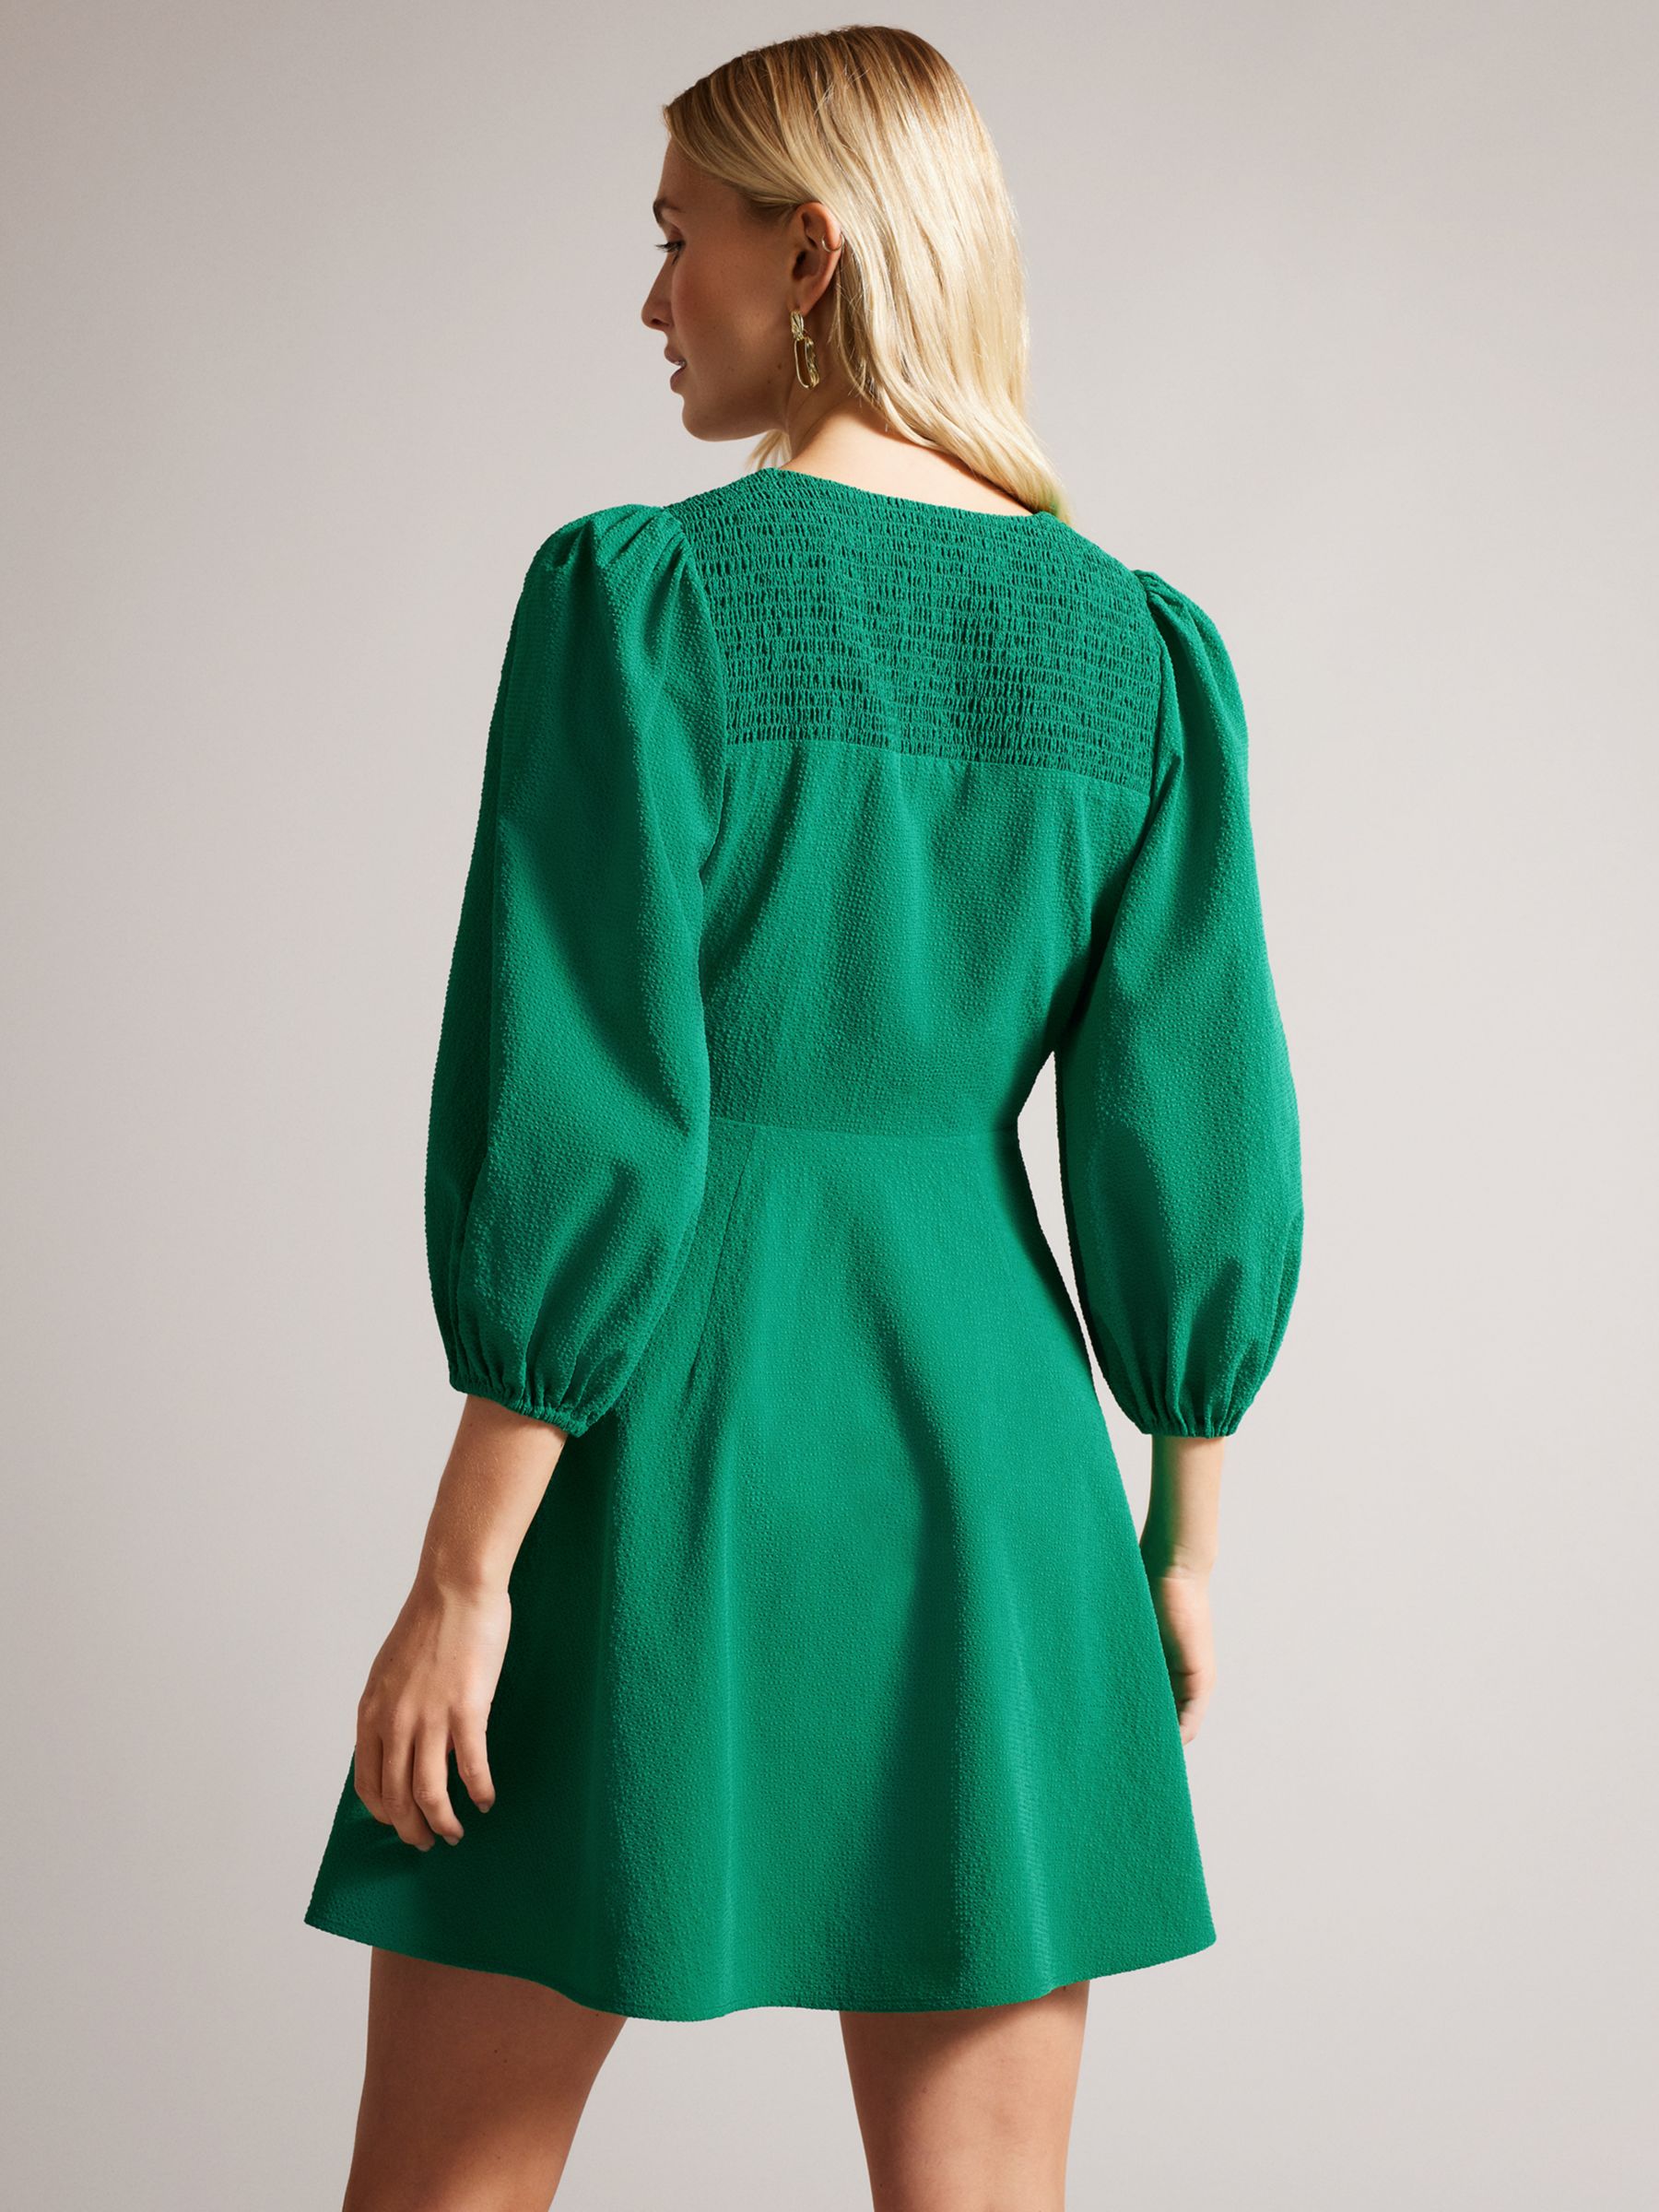 Ted Baker Jozelyn Tie Front Mini Dress, Green at John Lewis & Partners